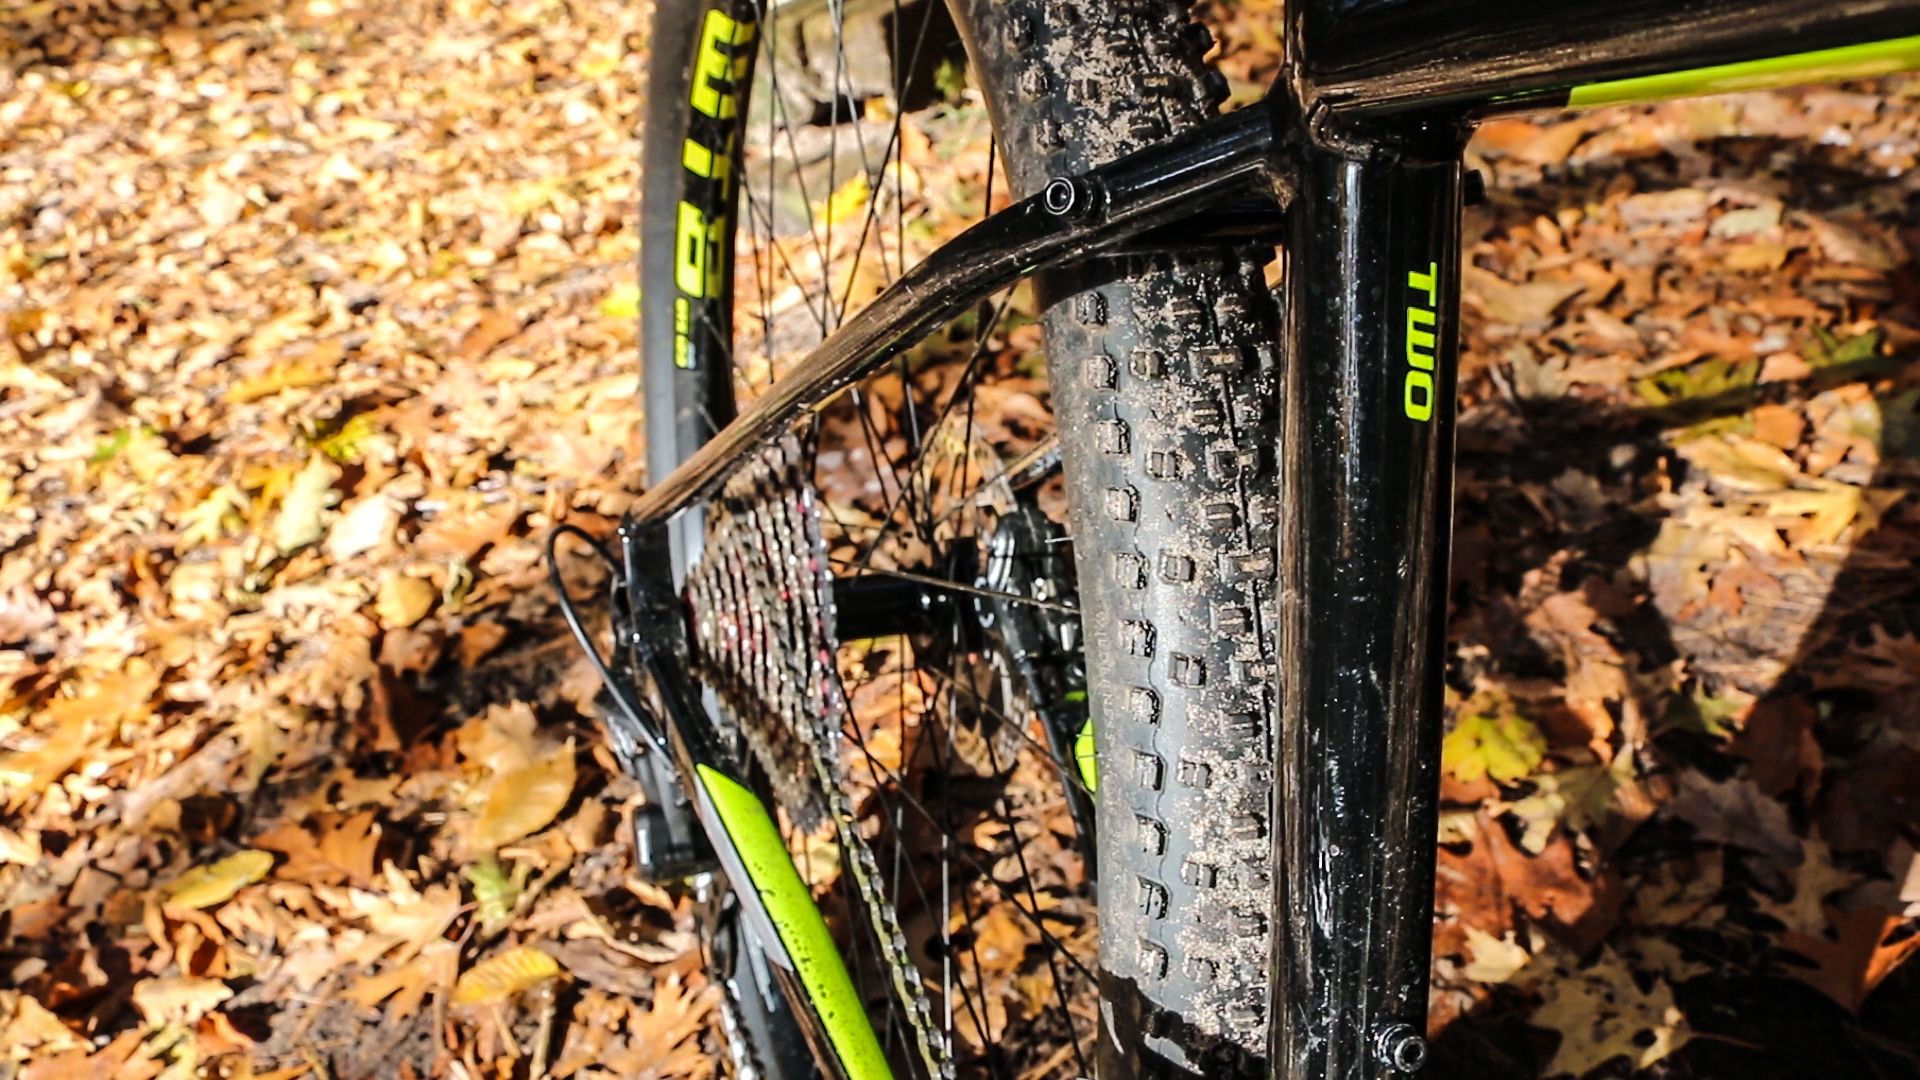 cannondale trail 2 2019 review